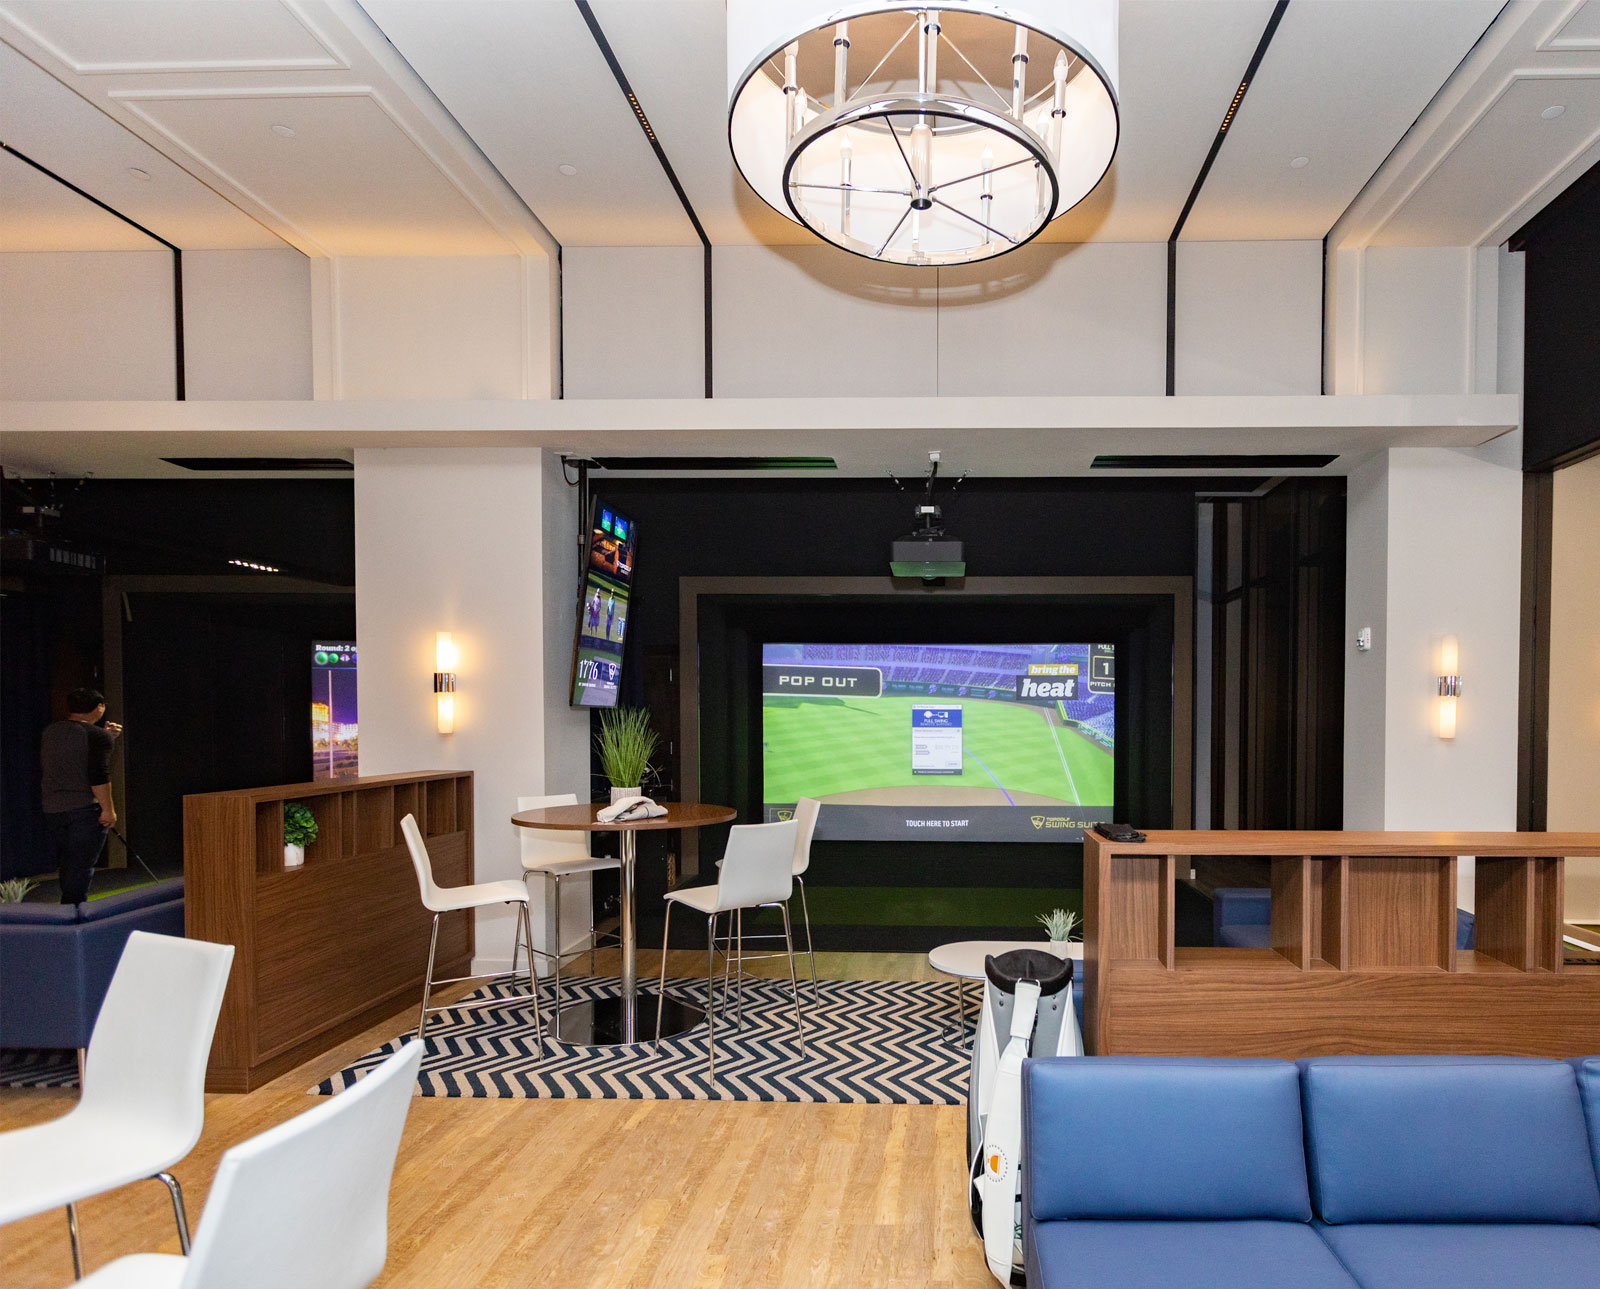 Topgolf Swing Suite at 1776 by David Burke